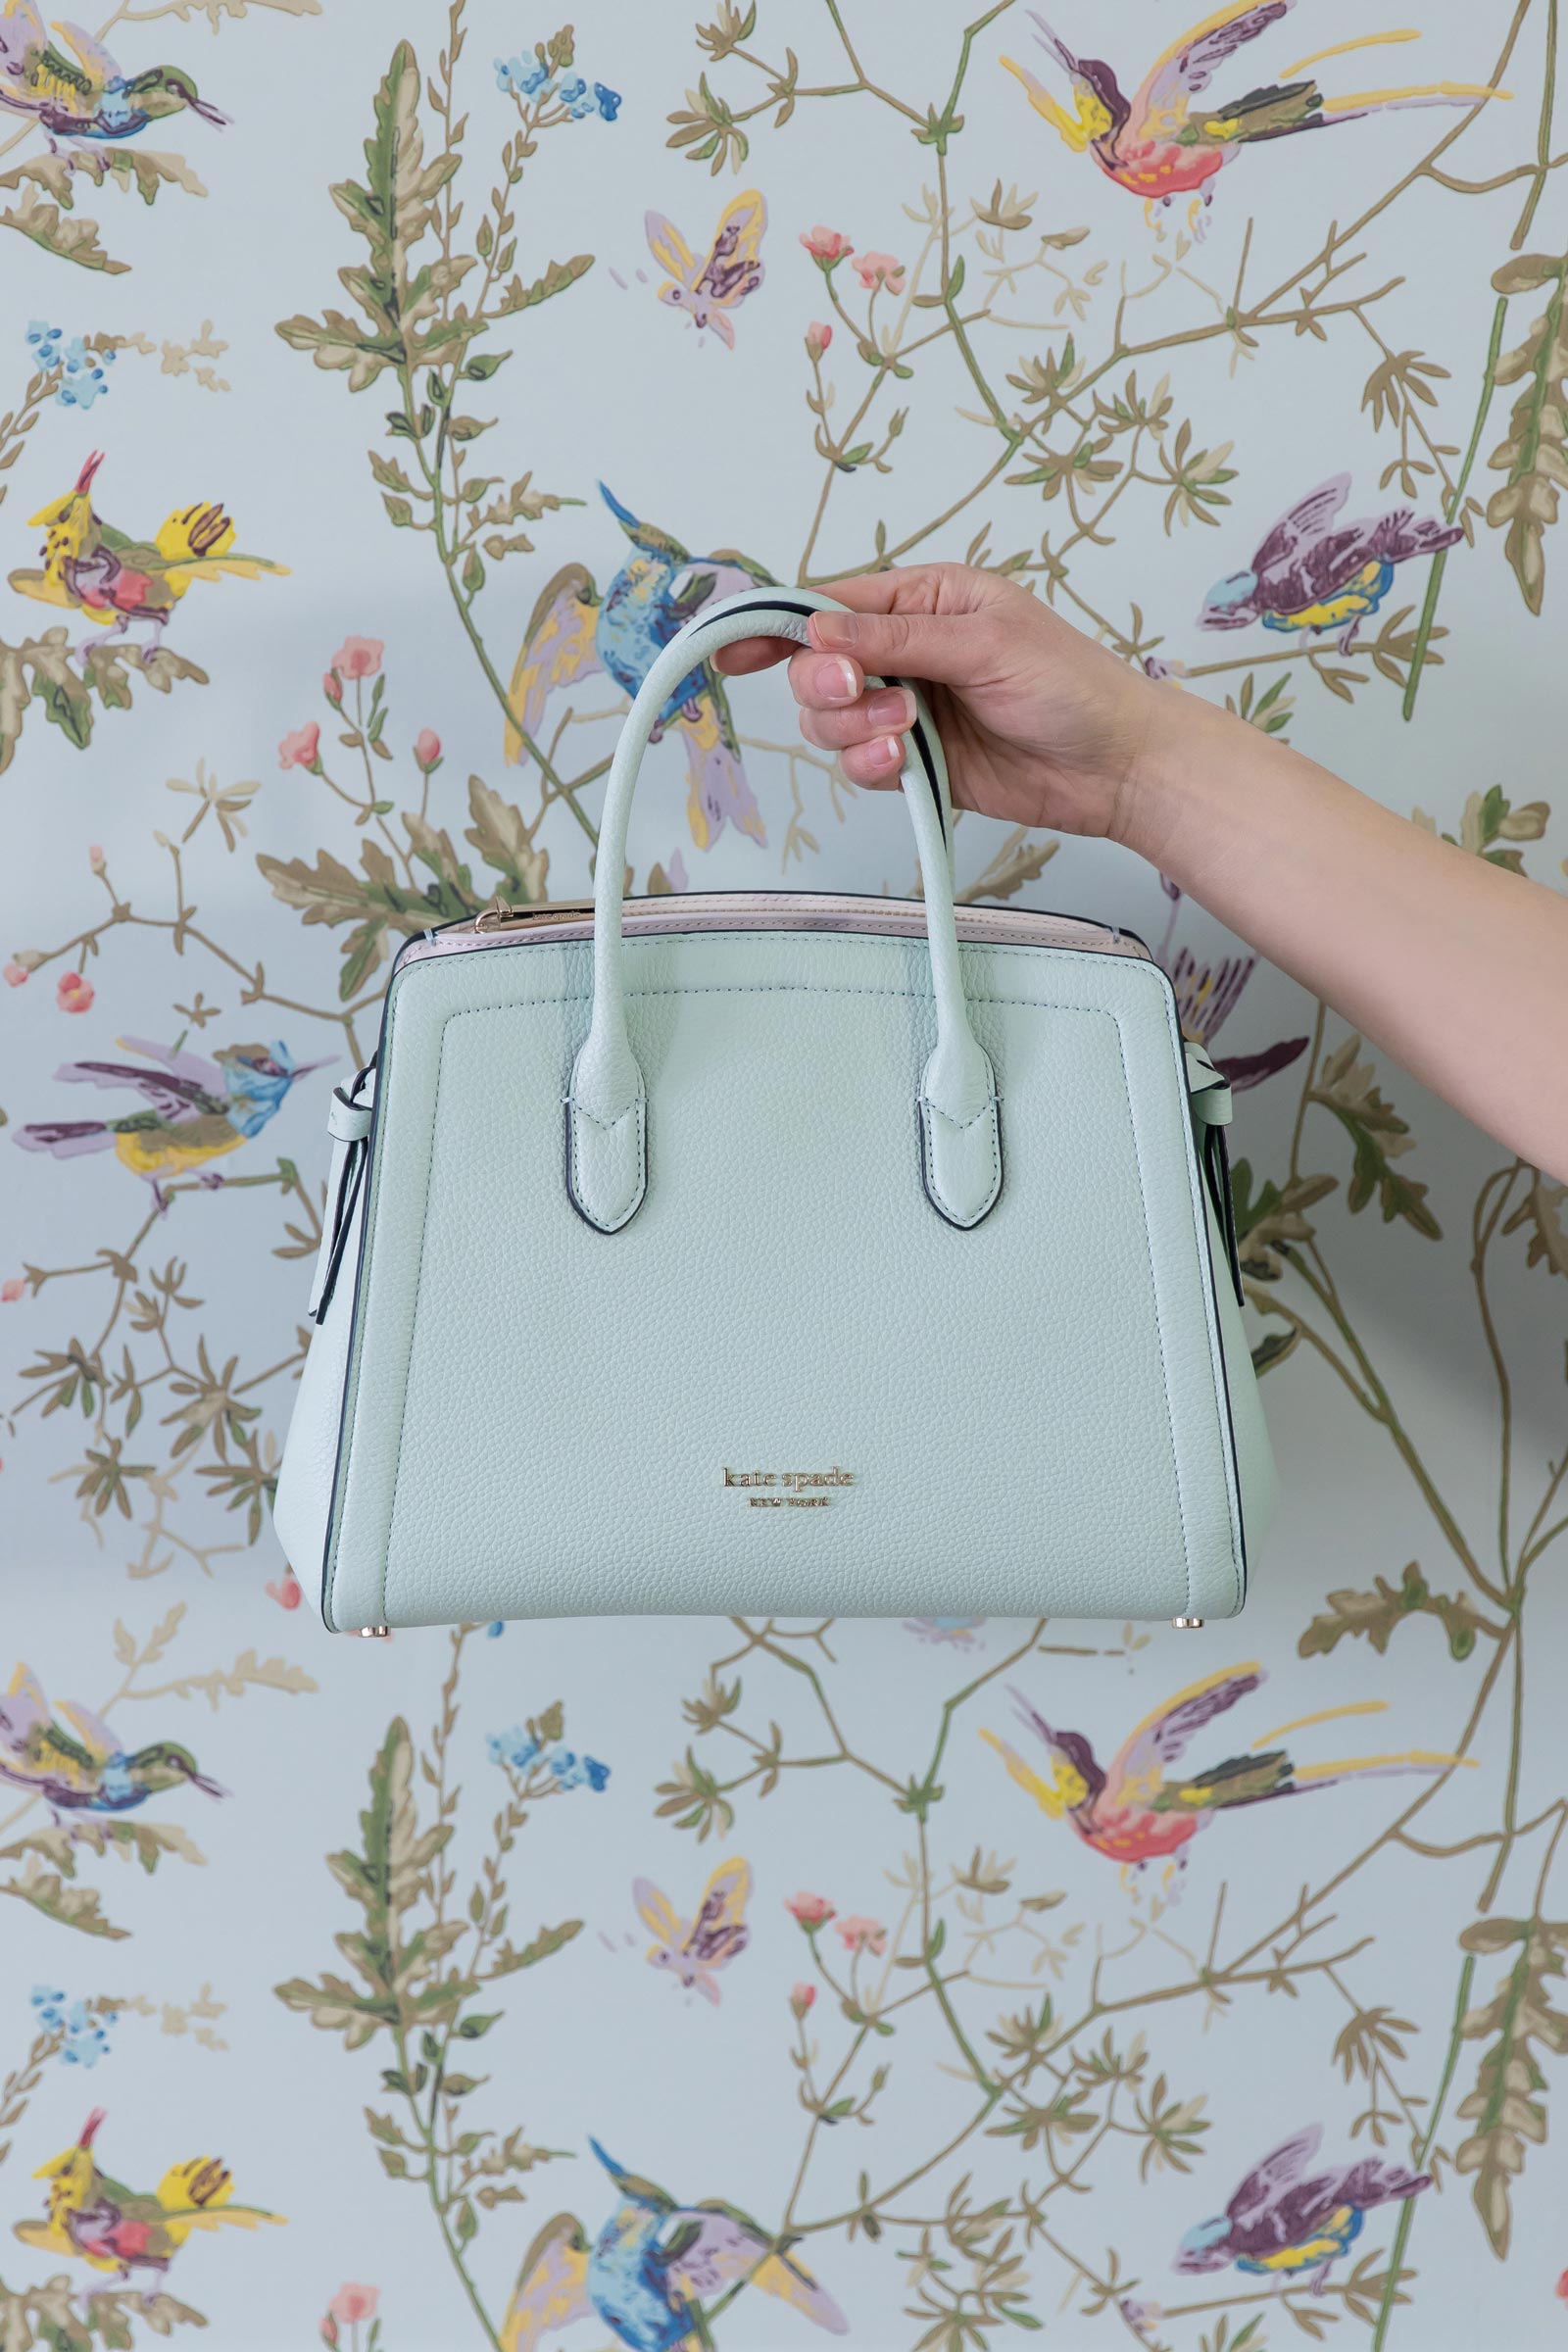 Kate Spade Sylvia Large Dome Satchel Review: an honest and detailed review  of the crossgrain leather Kate Spade Sylvia bag in Rococo Pink. | Kate  spade handbags, Bags, Pink handbags